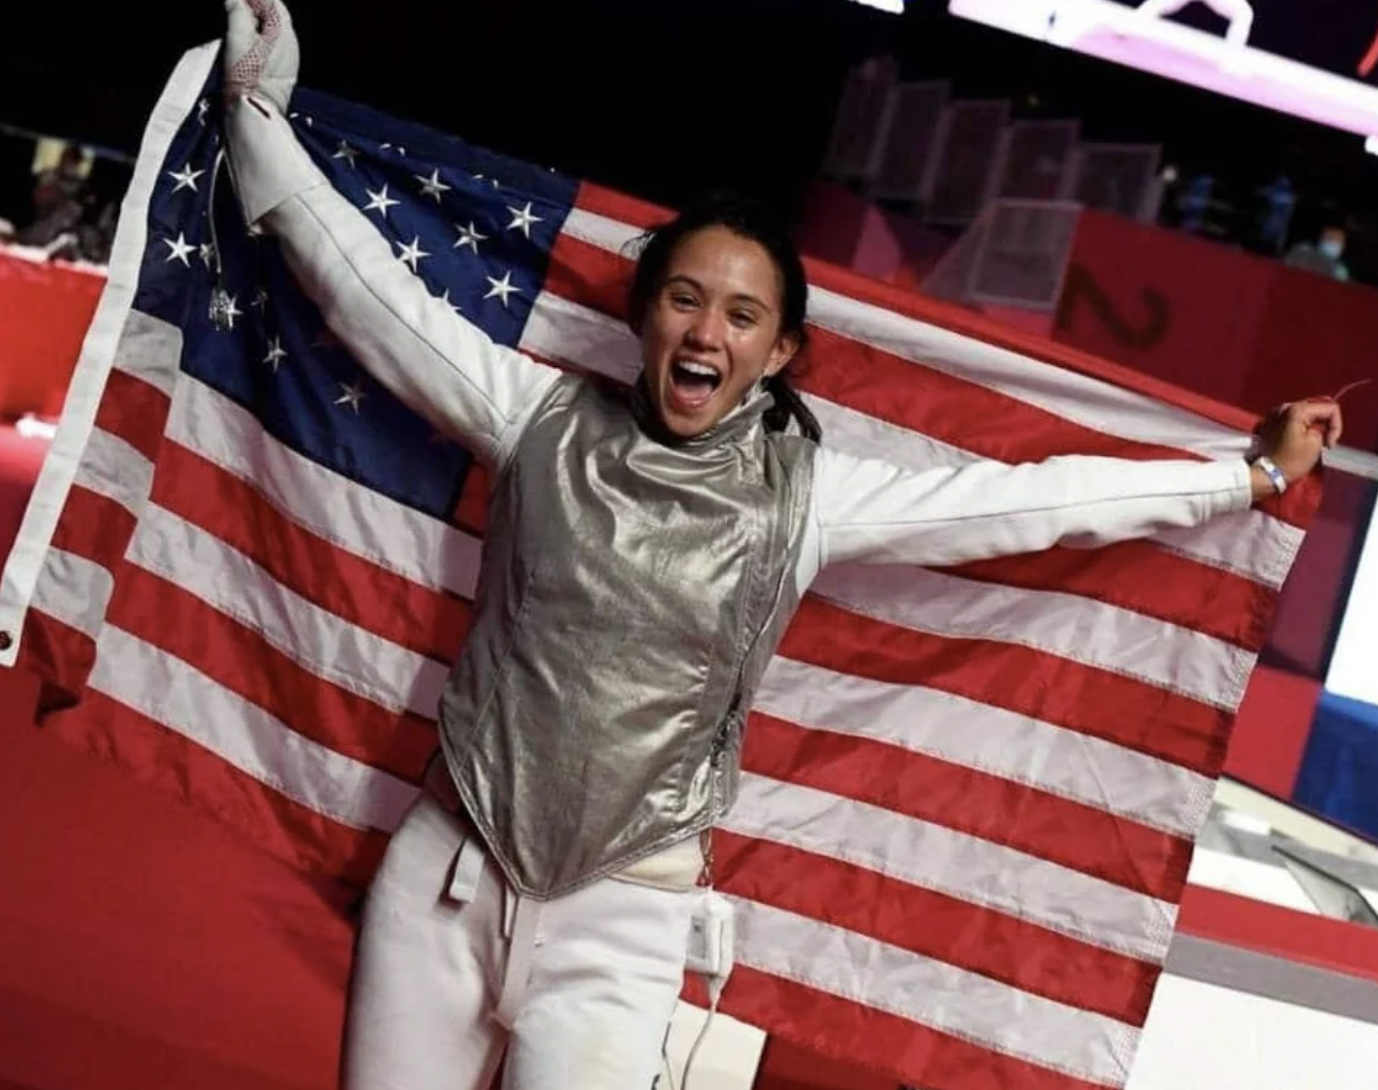 Filipino-American, Lee Kiefer wins Team USA’s first gold medal for women’s individual foil fencing.